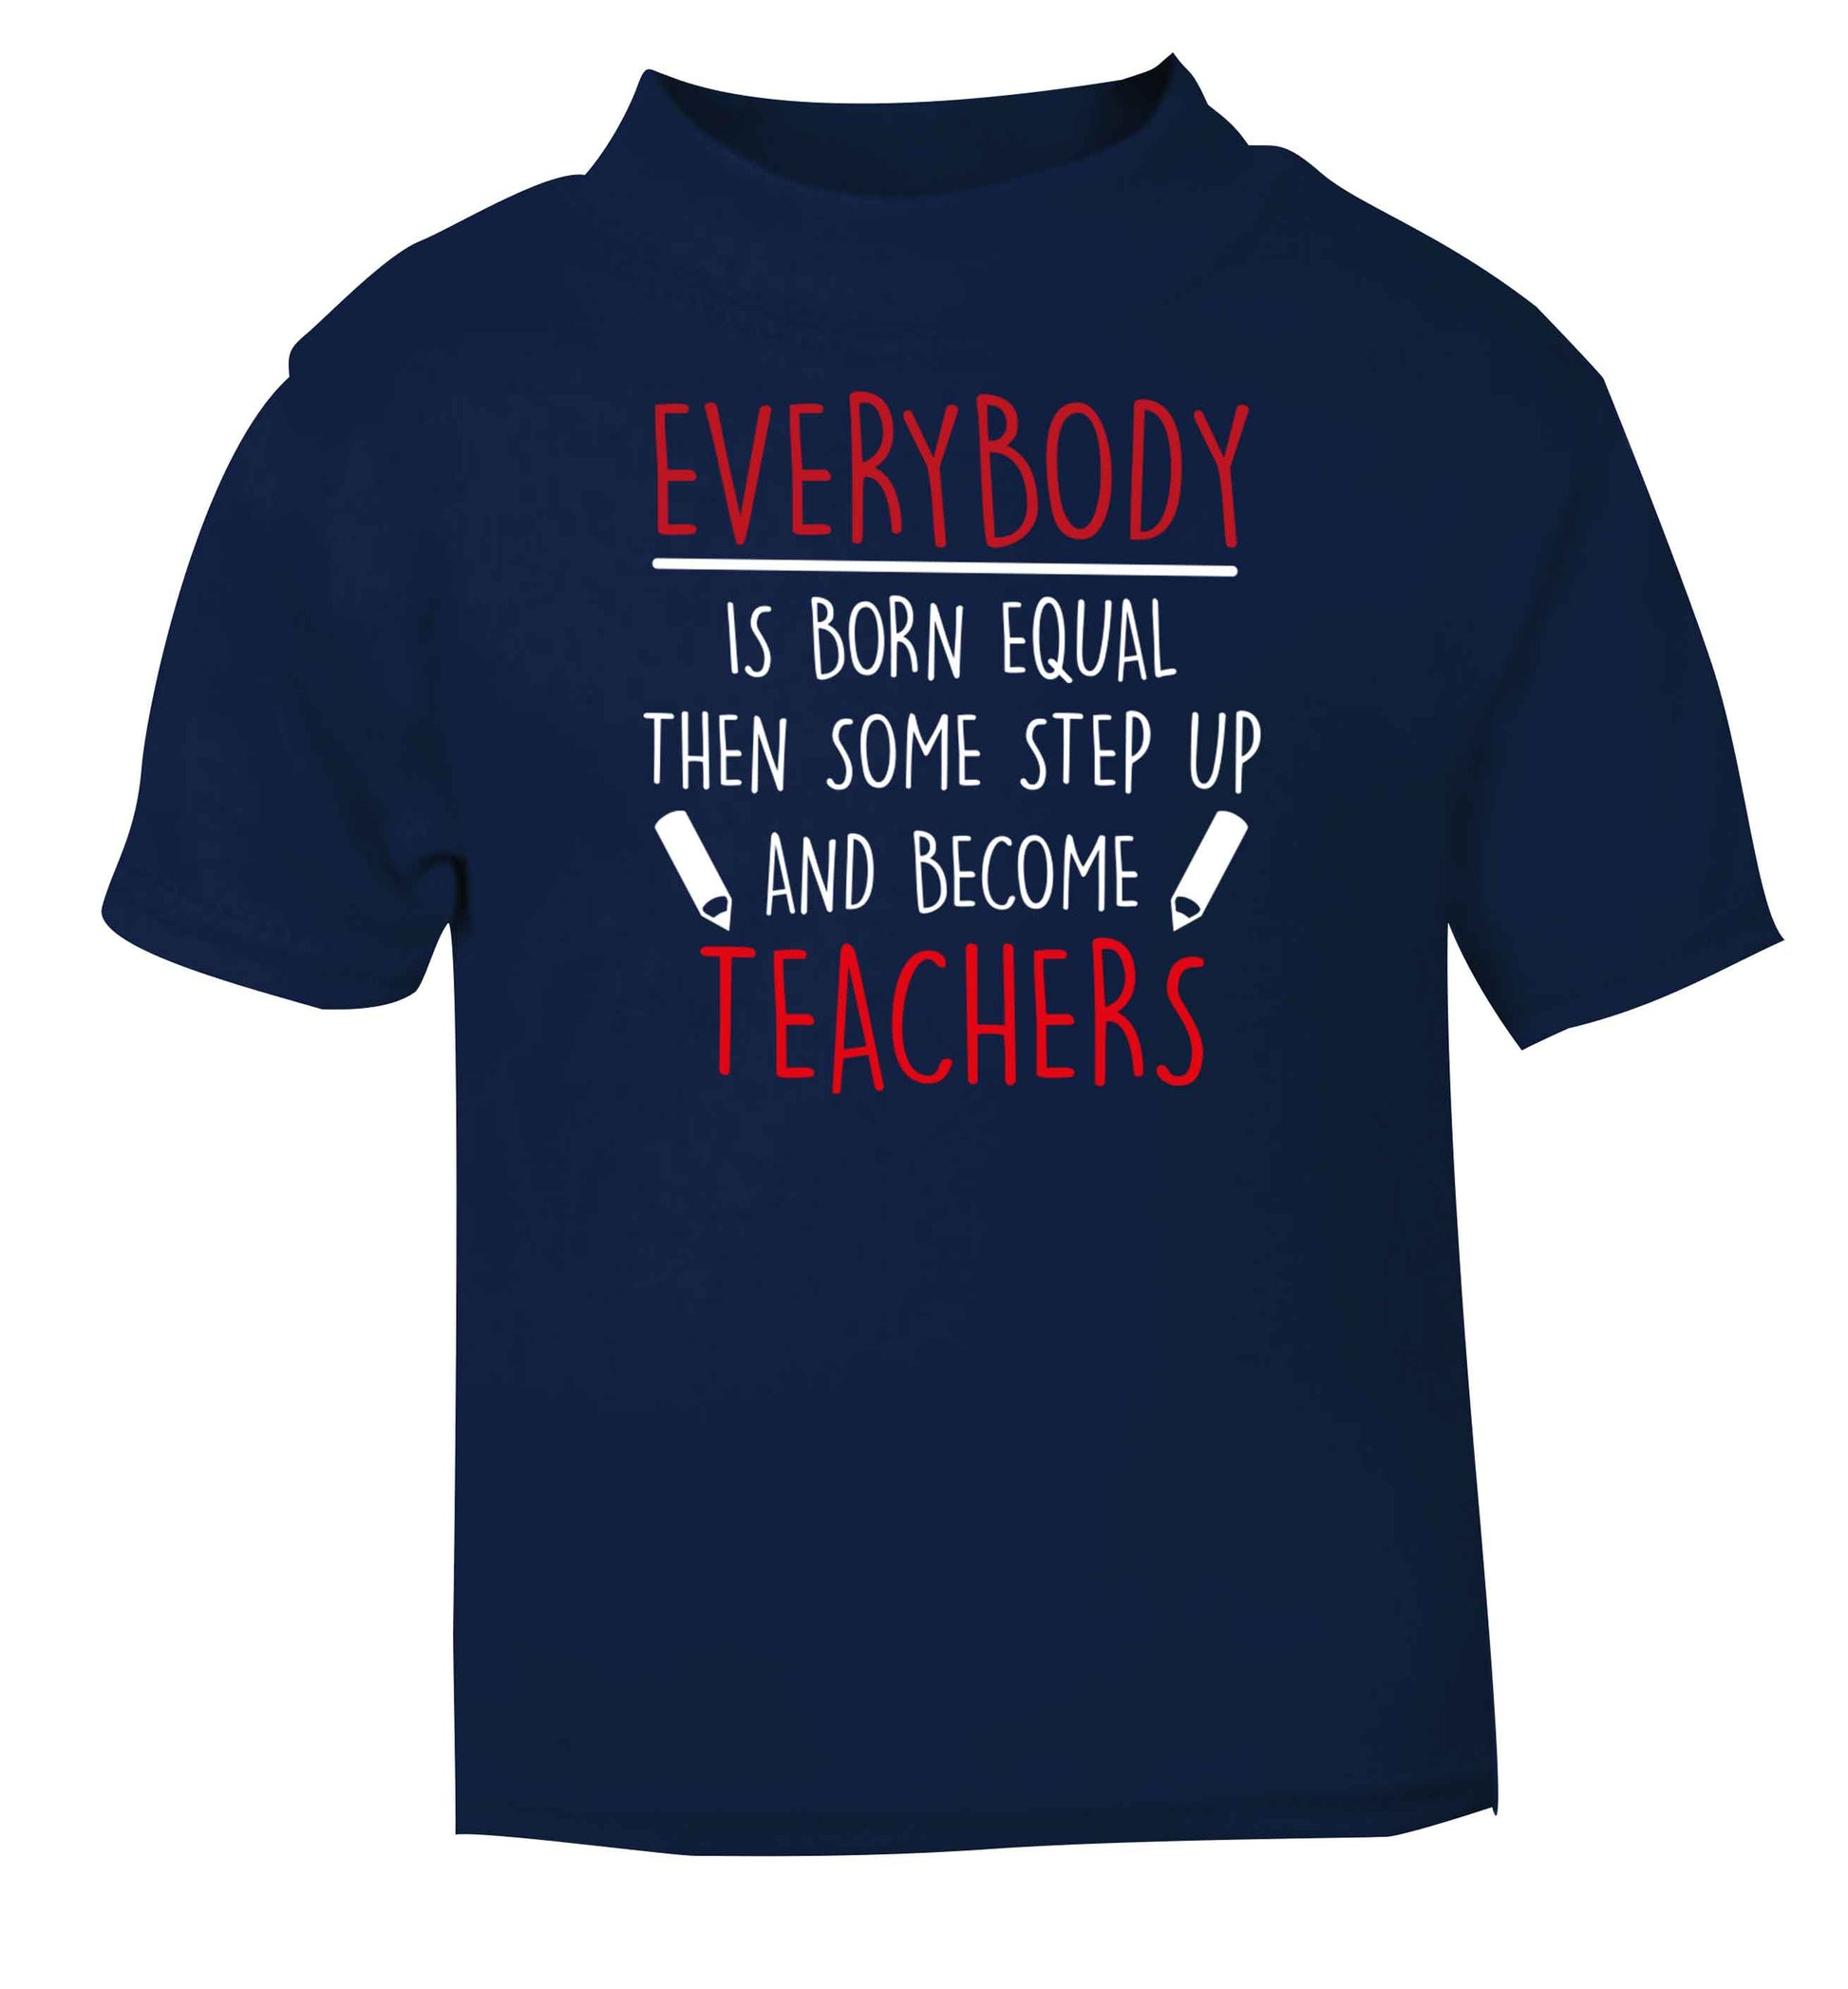 Everybody is born equal then some step up and become teachers navy baby toddler Tshirt 2 Years